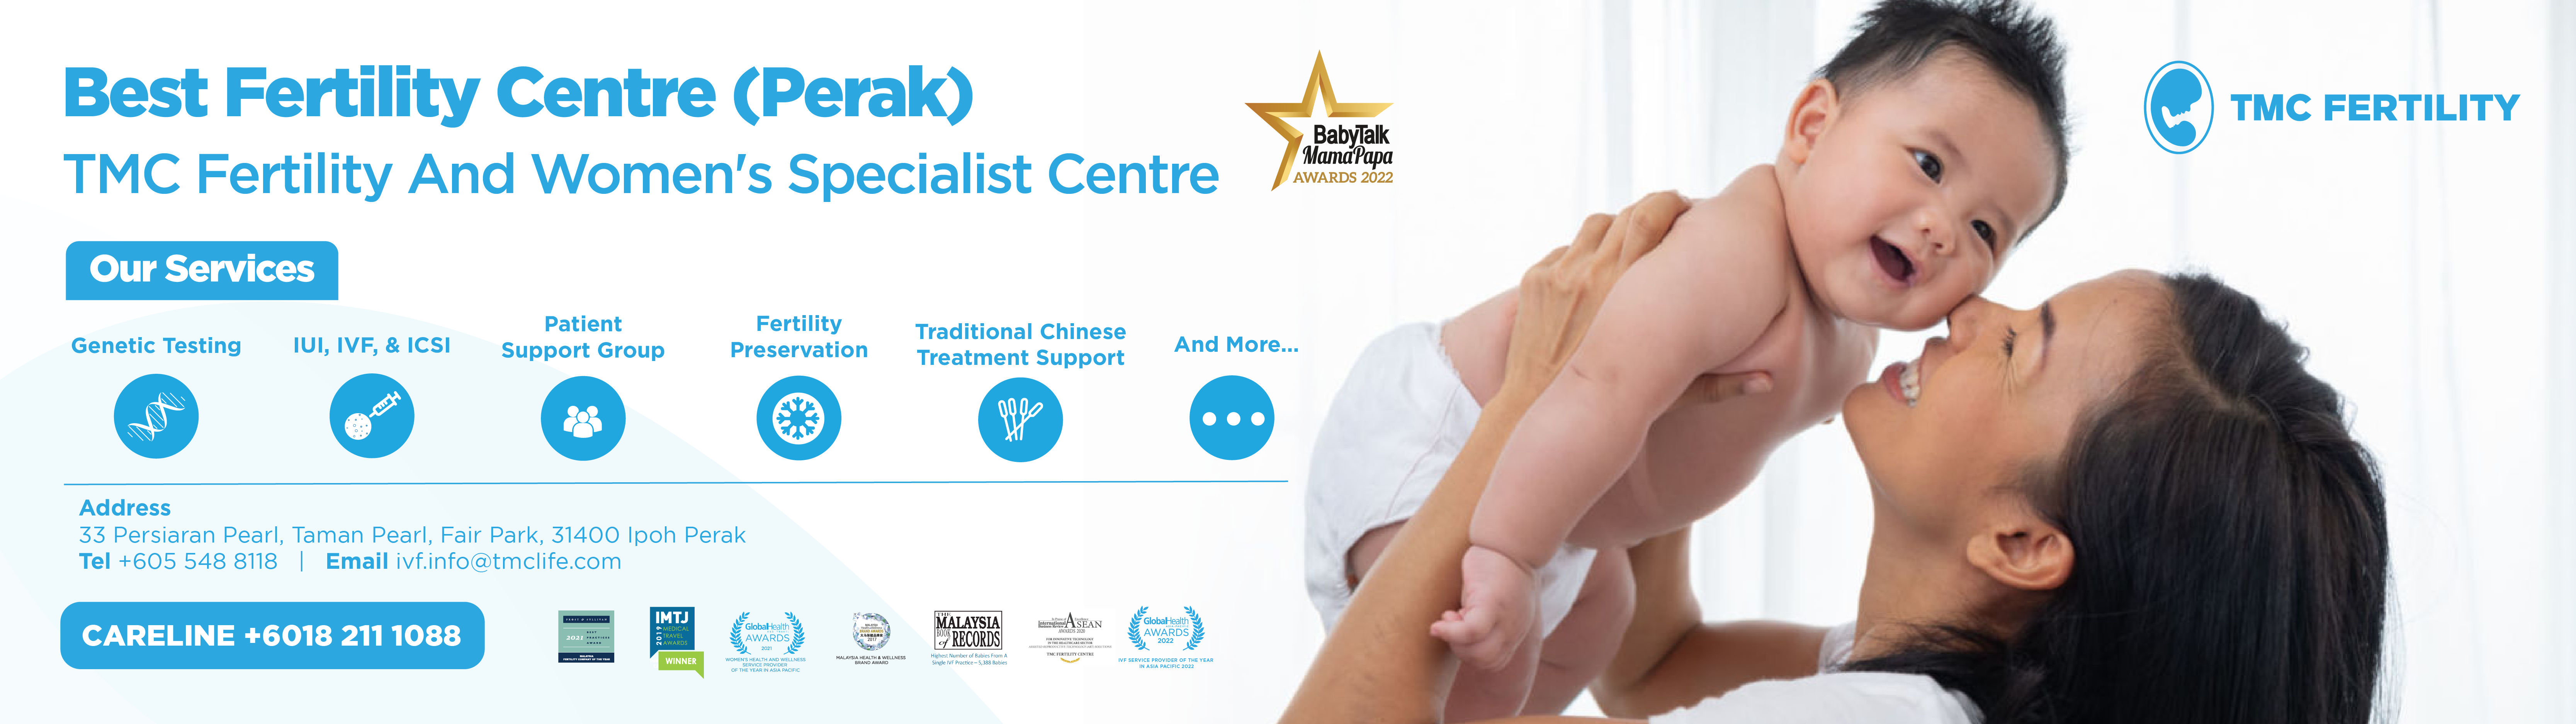 Realising Your Potential for Parenthood at TMC Fertility